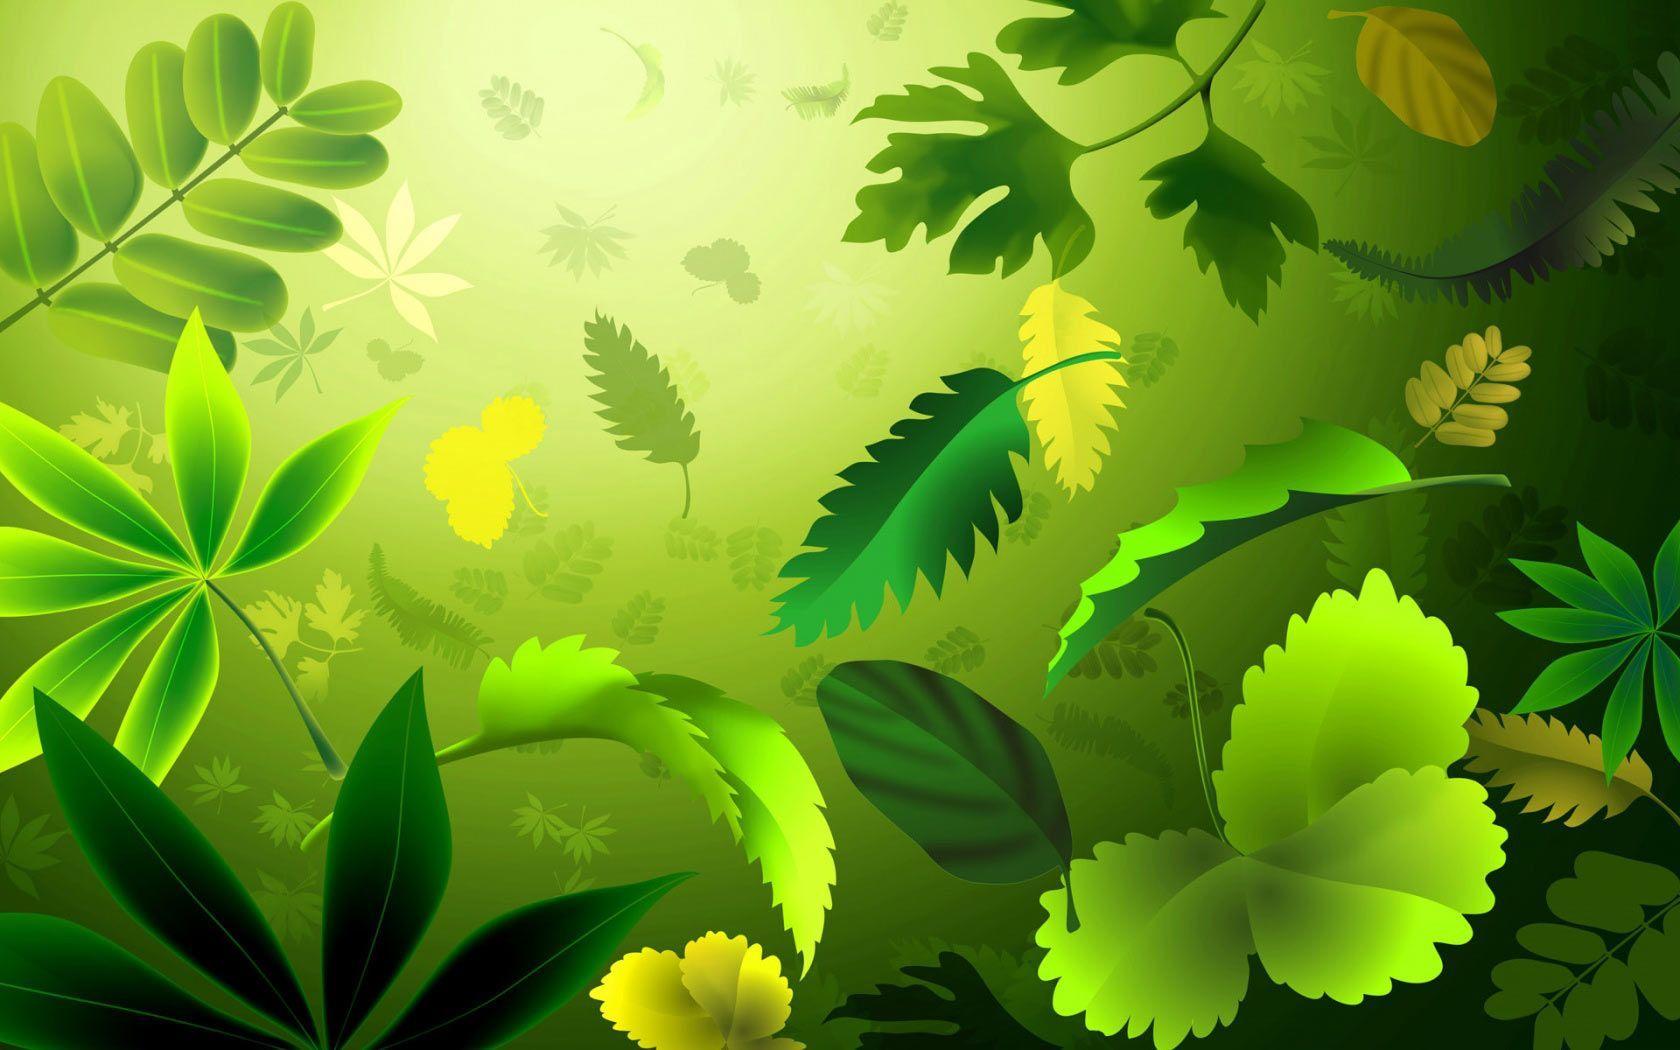 Abstract Green Nature Wallpapers - Top Free Abstract Green Nature